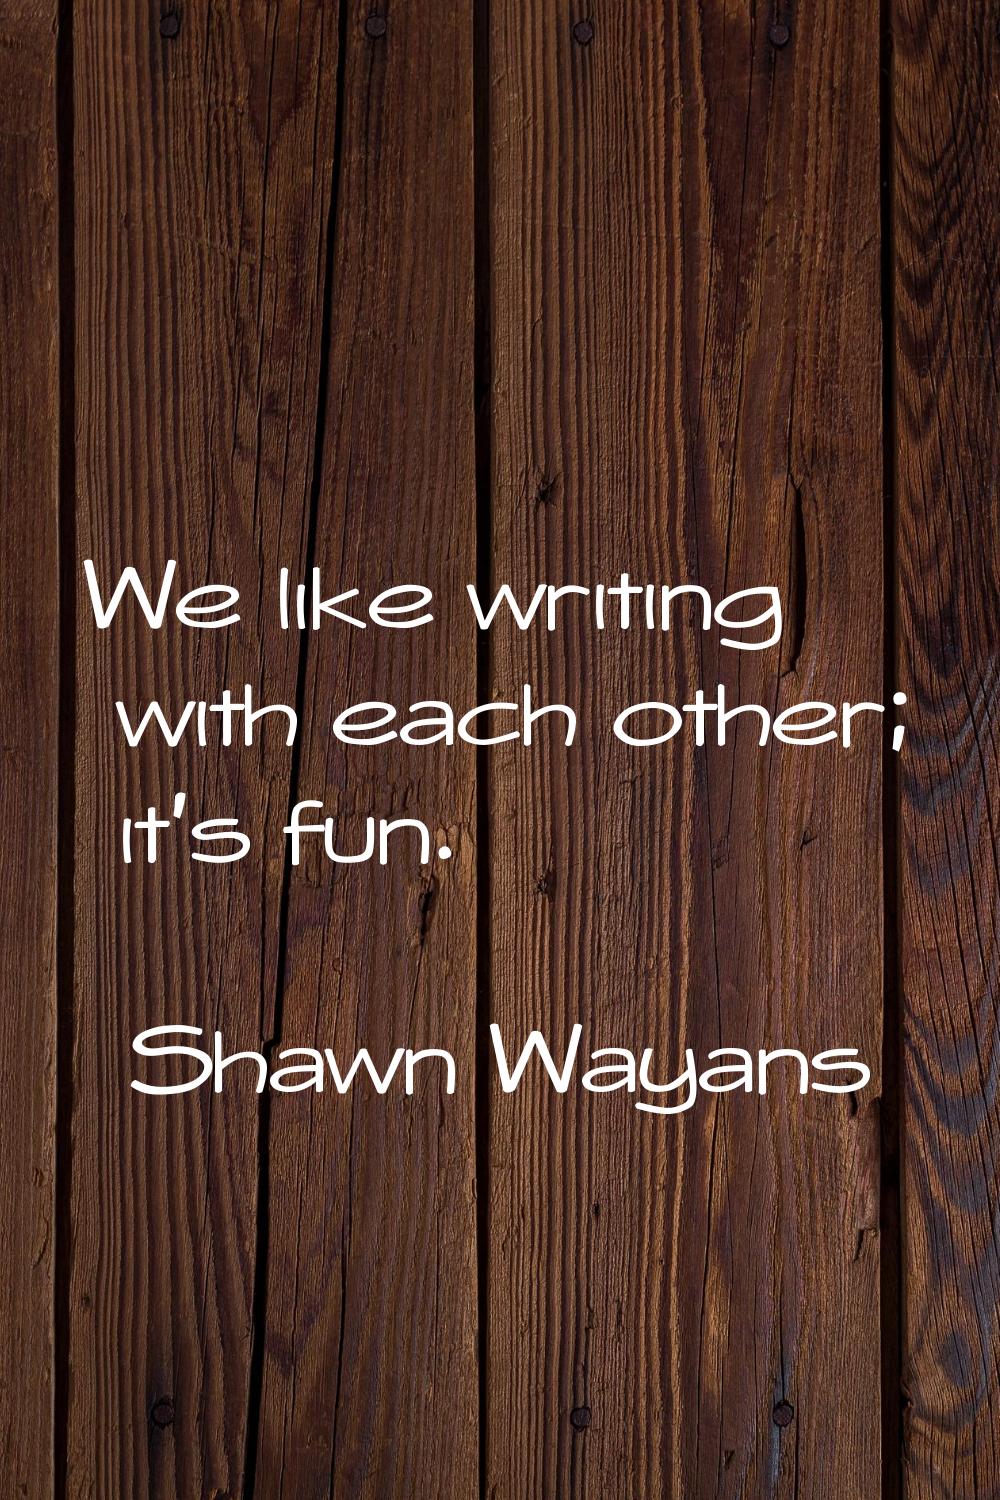 We like writing with each other; it's fun.